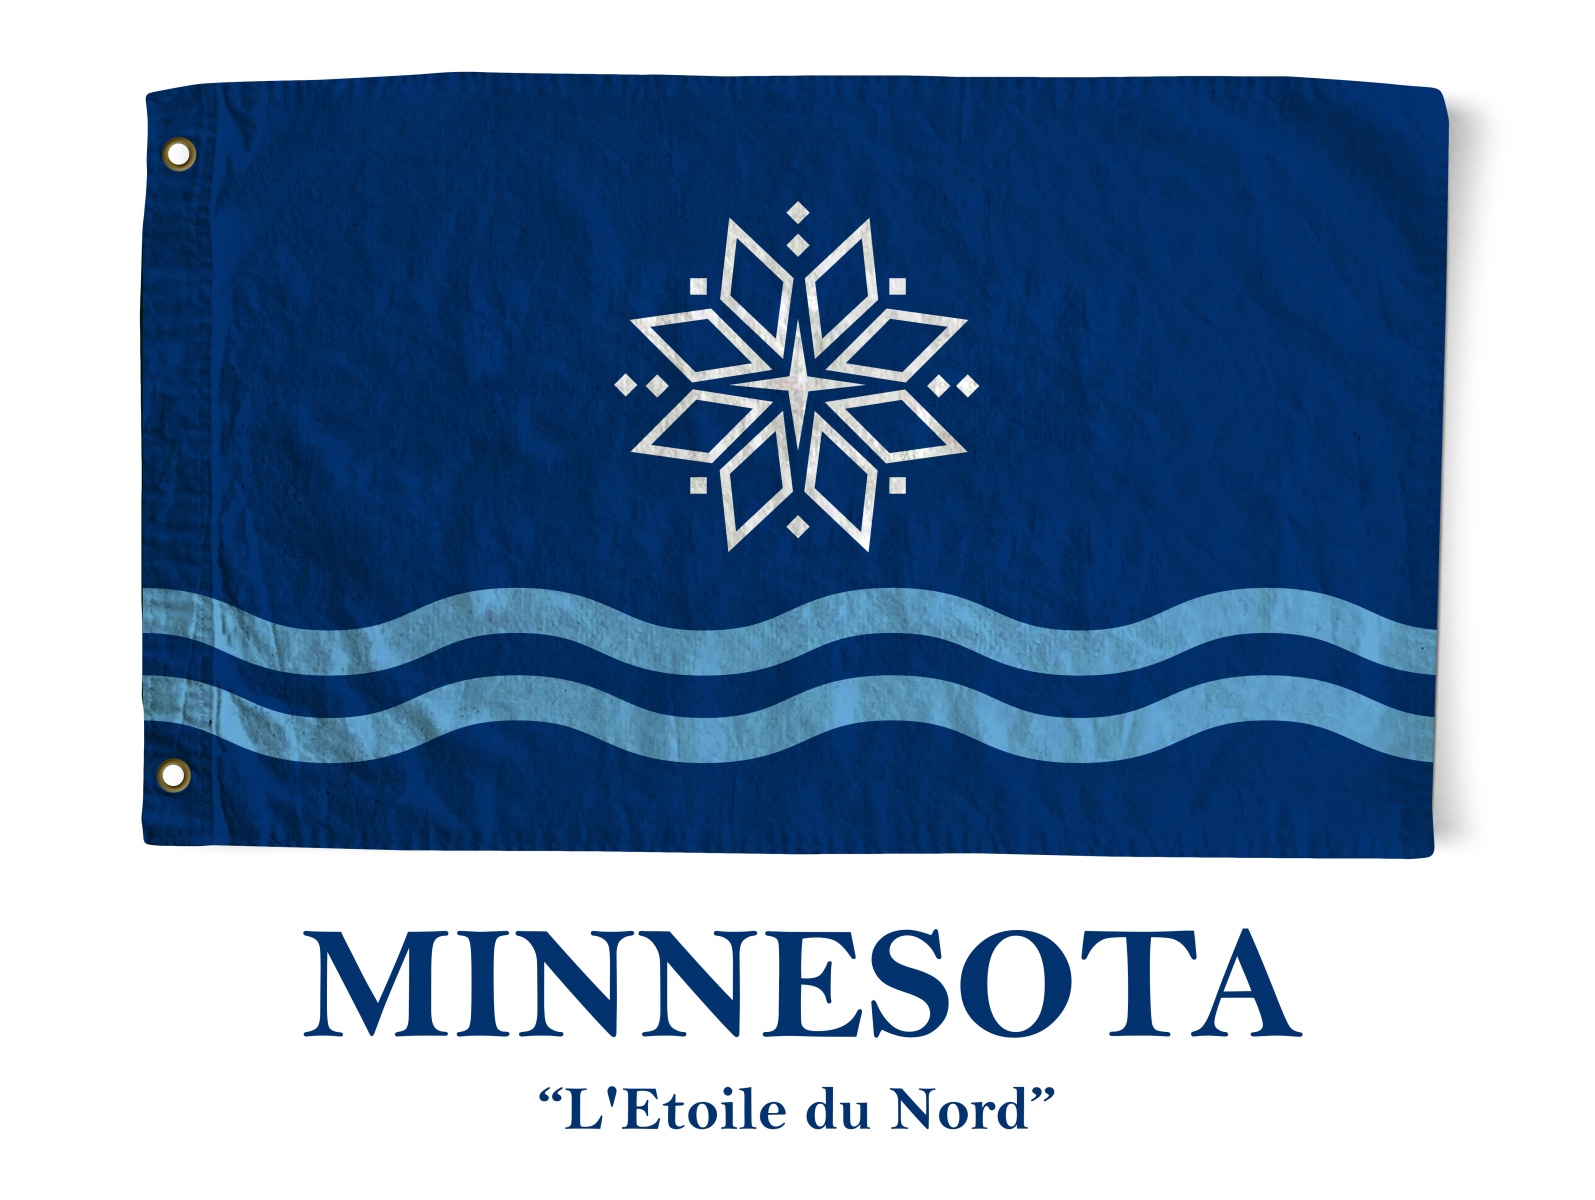 Concept for a new state flag of Minnesota by James Fruth Creative Pro